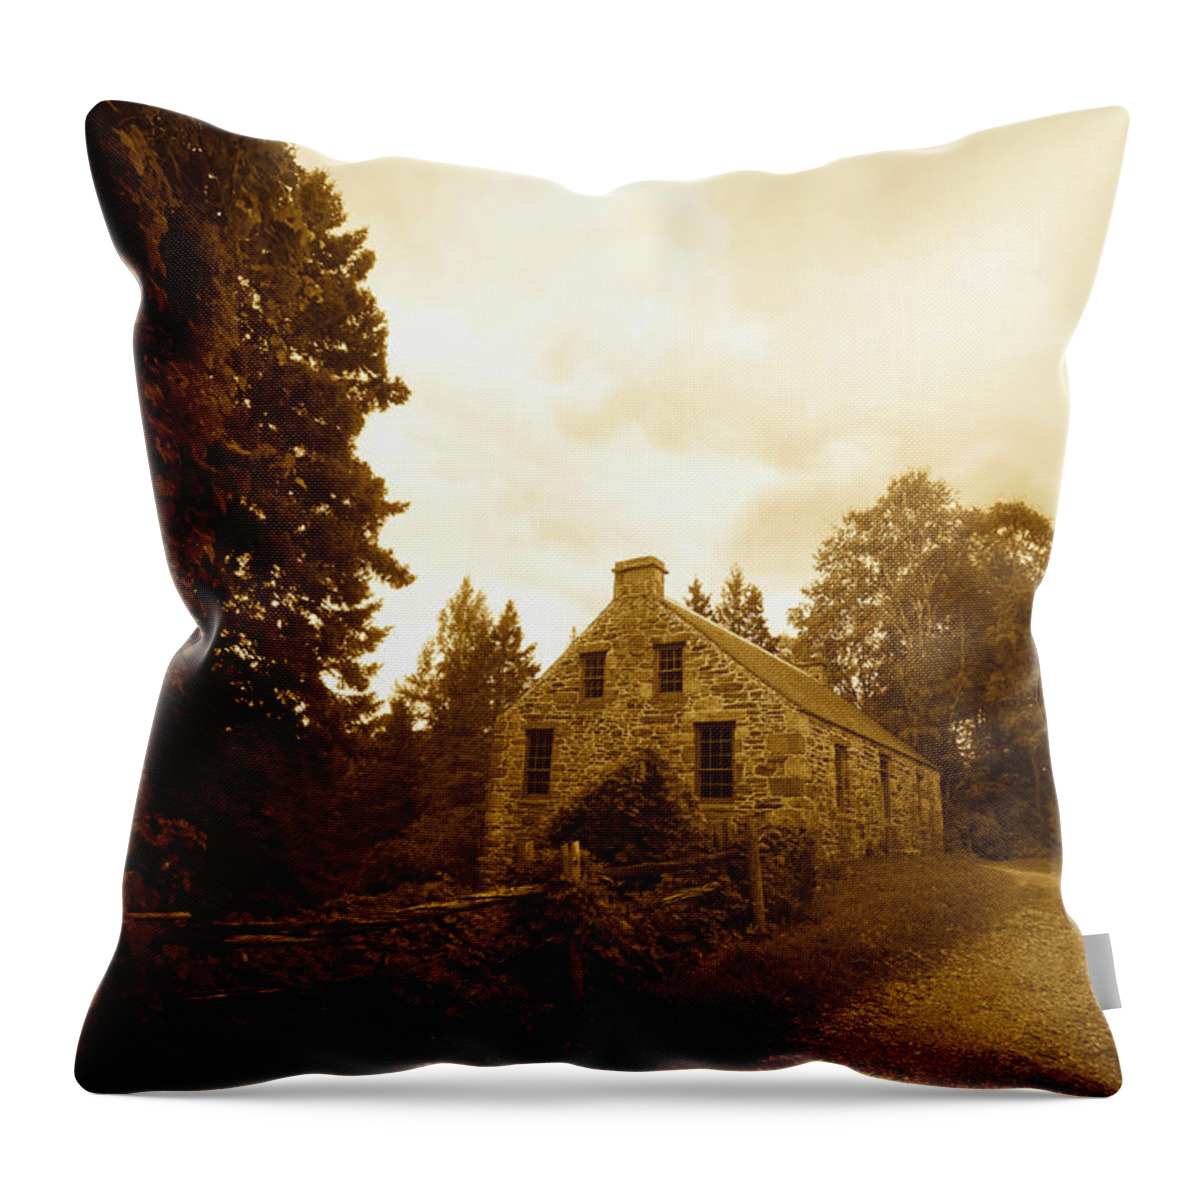 Stone Throw Pillow featuring the photograph The Olde Stone Cottage by Ron Haist